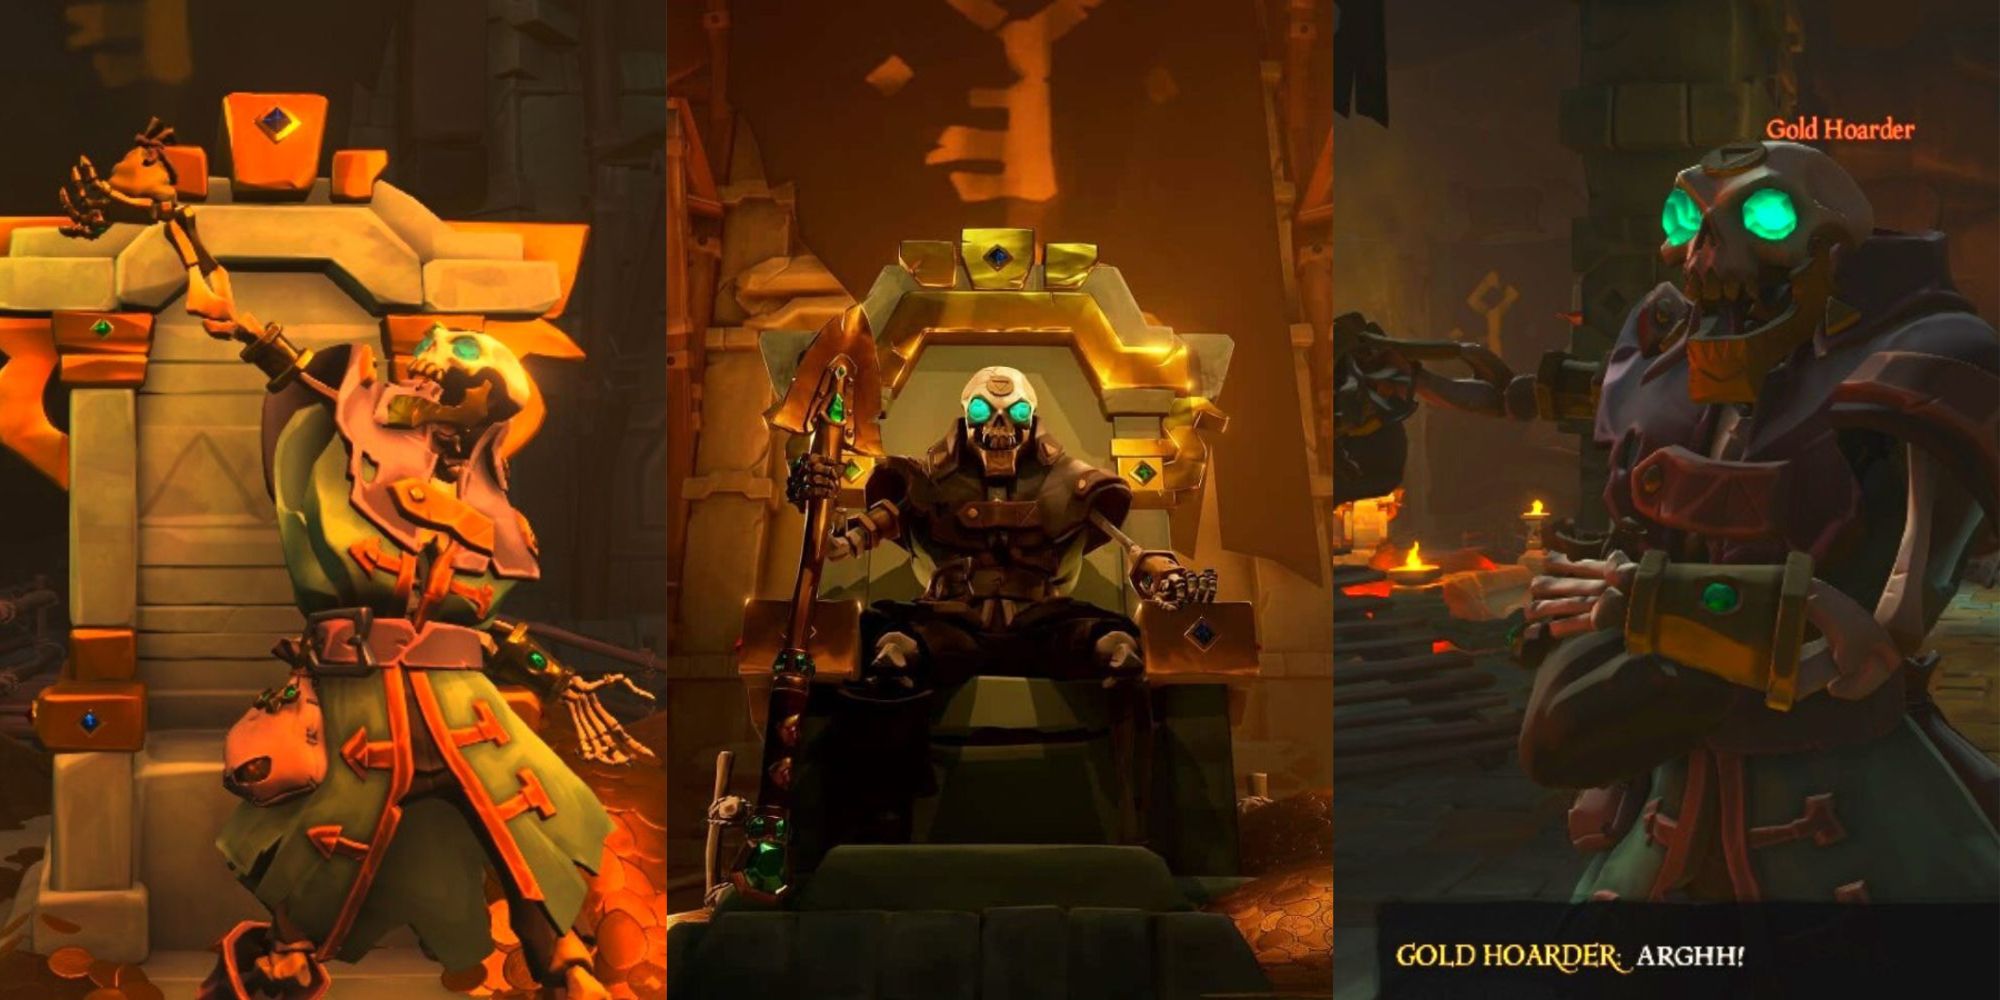 Three Images Of The Gold Hoarder Boss In Sea Of Thieves